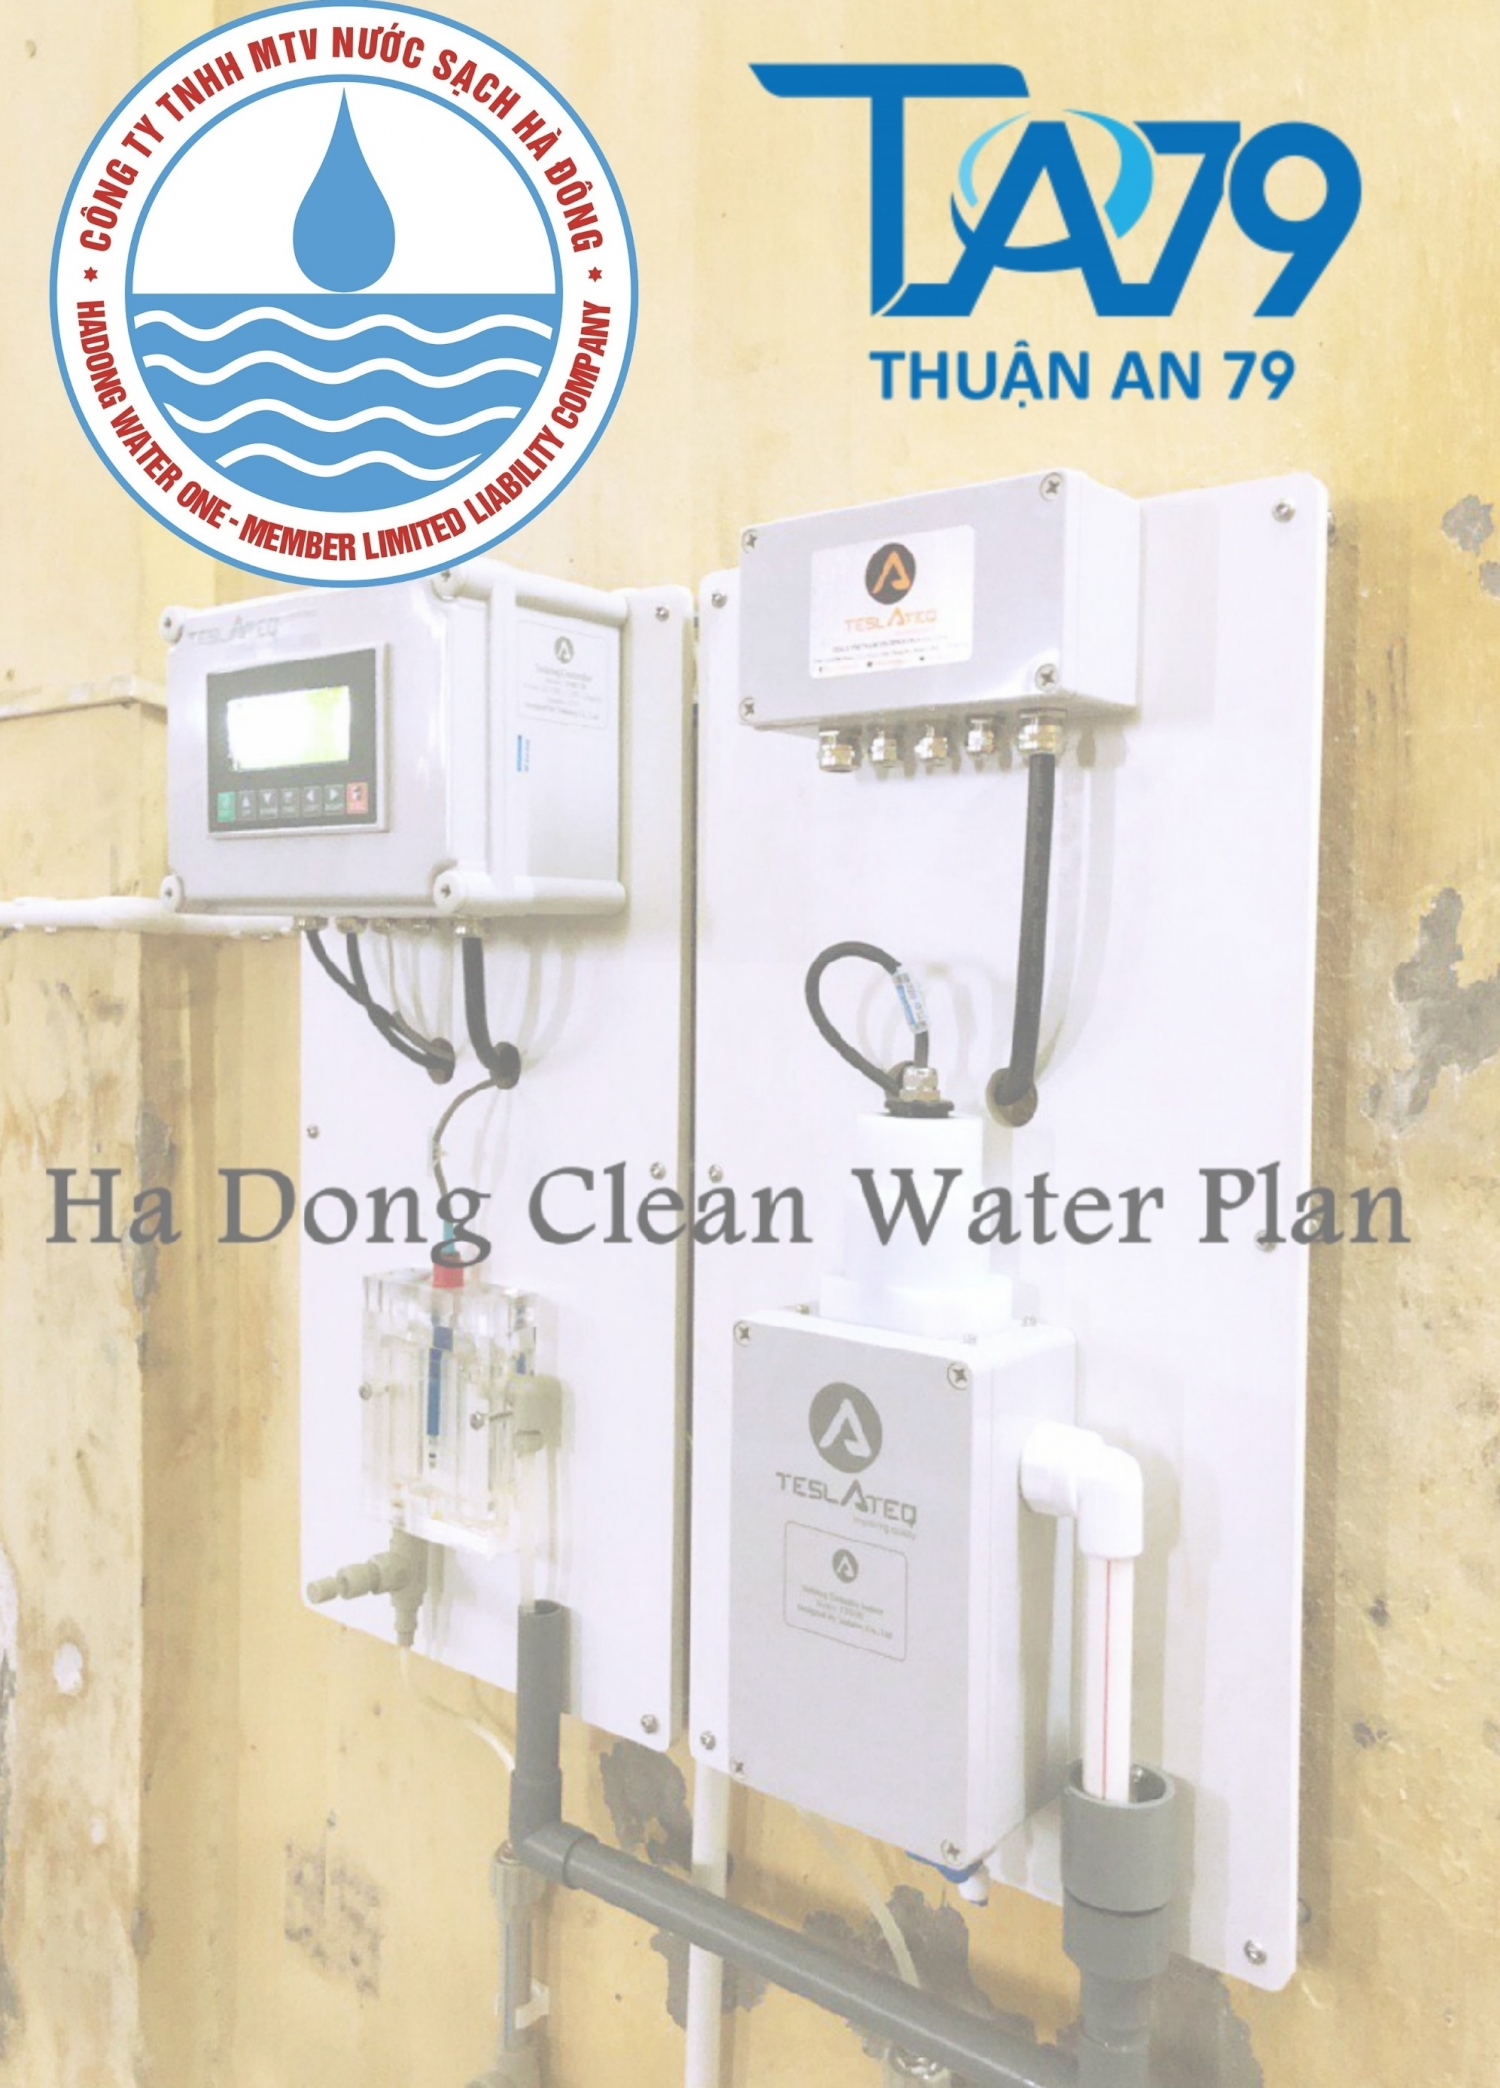 Ha Dong Clean Water Plant Project